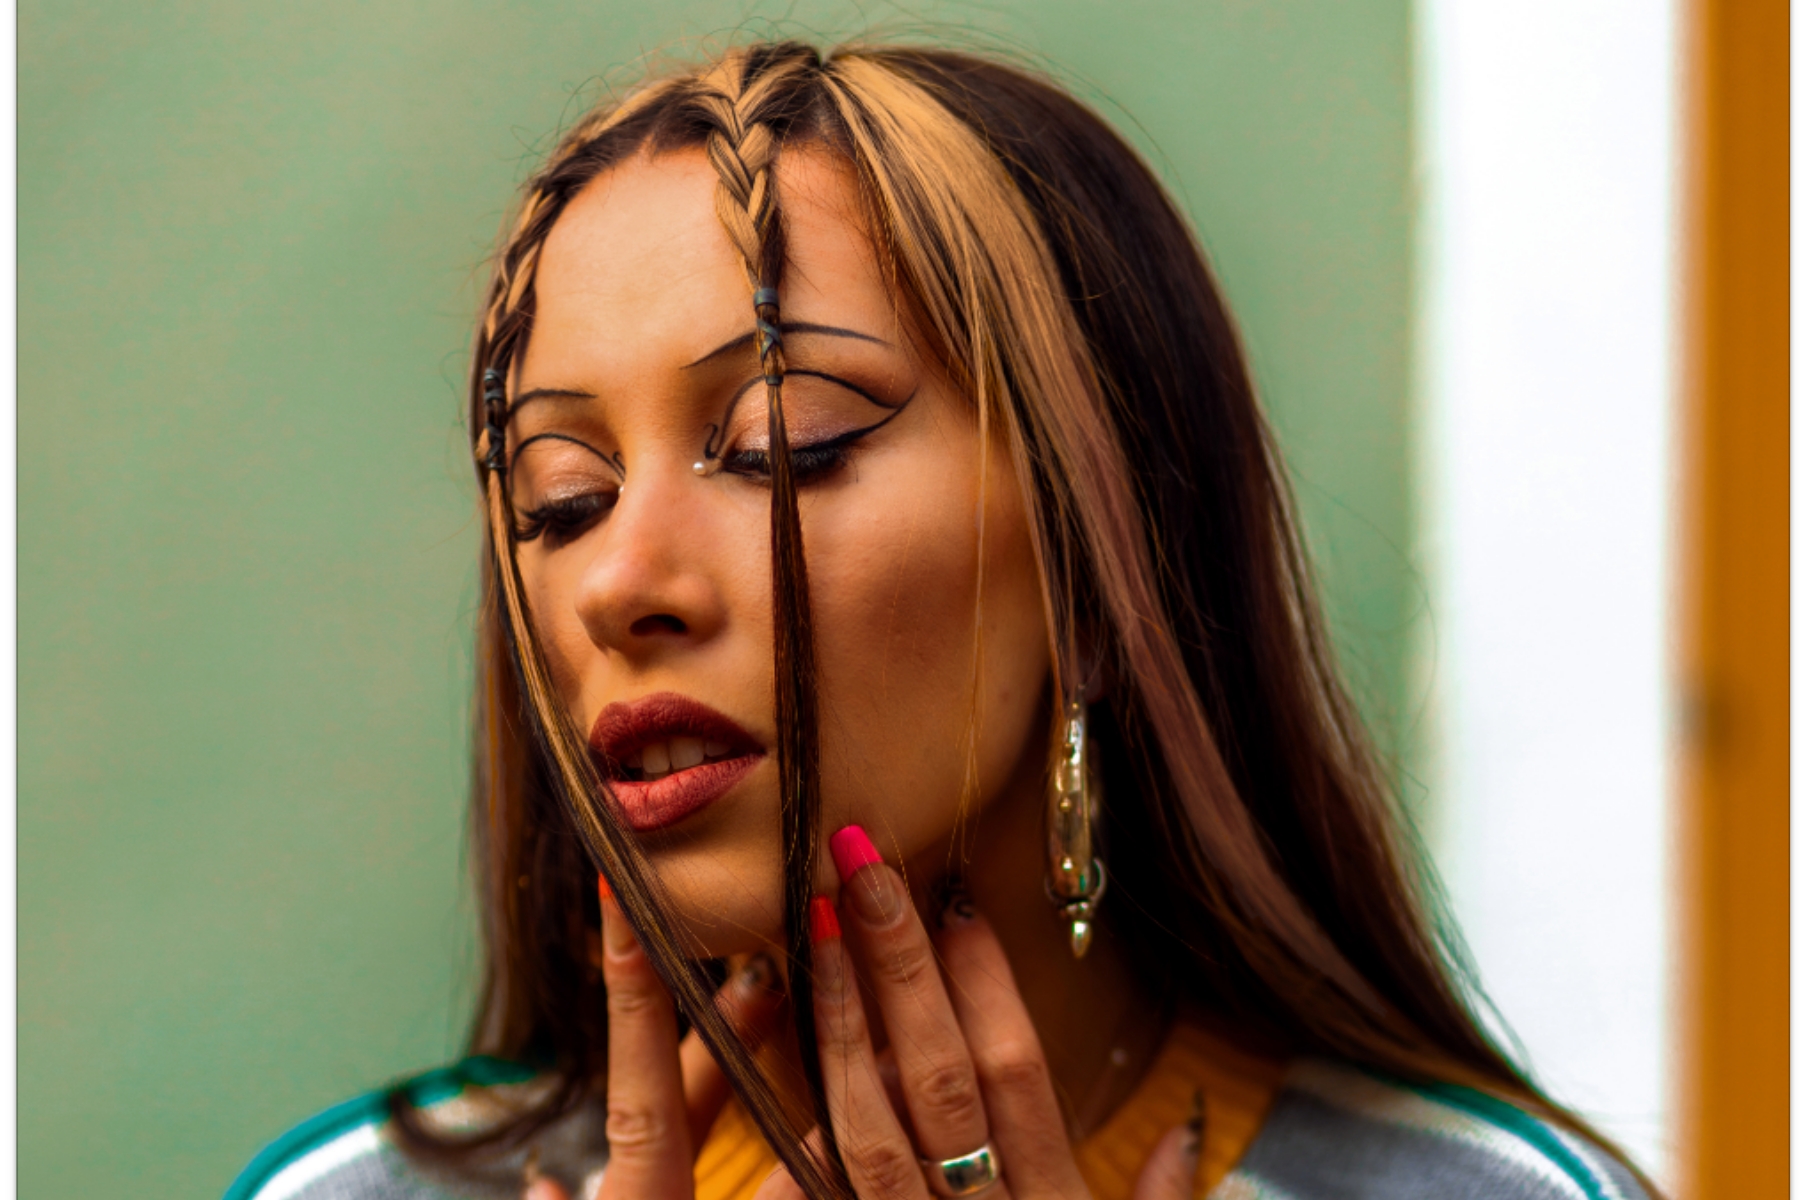 IN CONVERSATION: FABLE talks her new album, social media toxicity, the '90s, artists having to be content creators, and living off grid 3